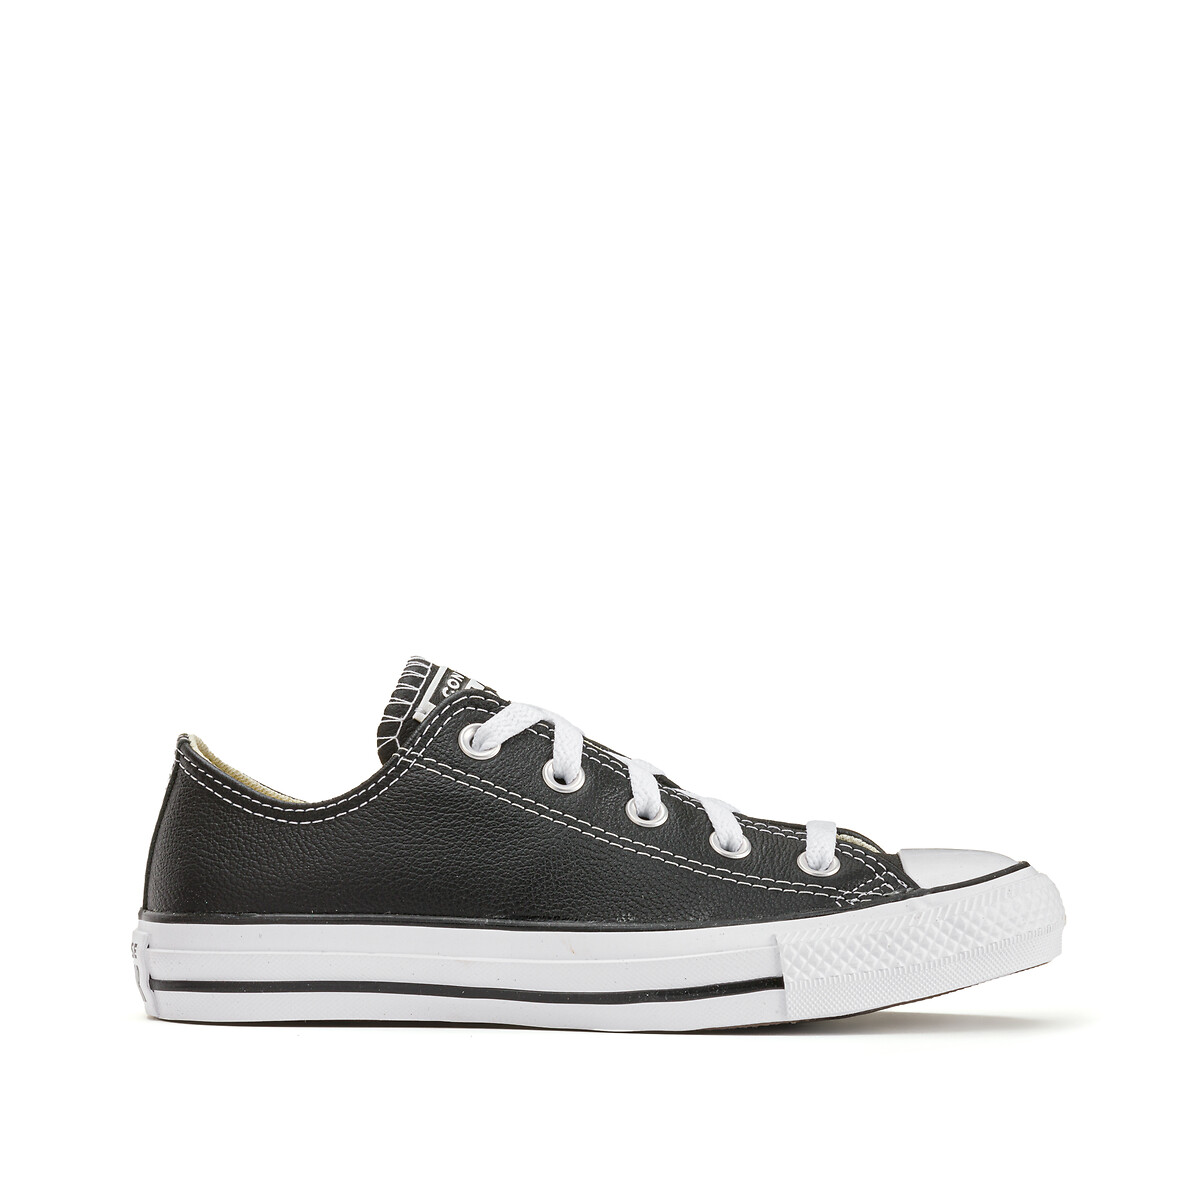 Sneakers Chuck Taylor All Star Ox, Leder von Converse